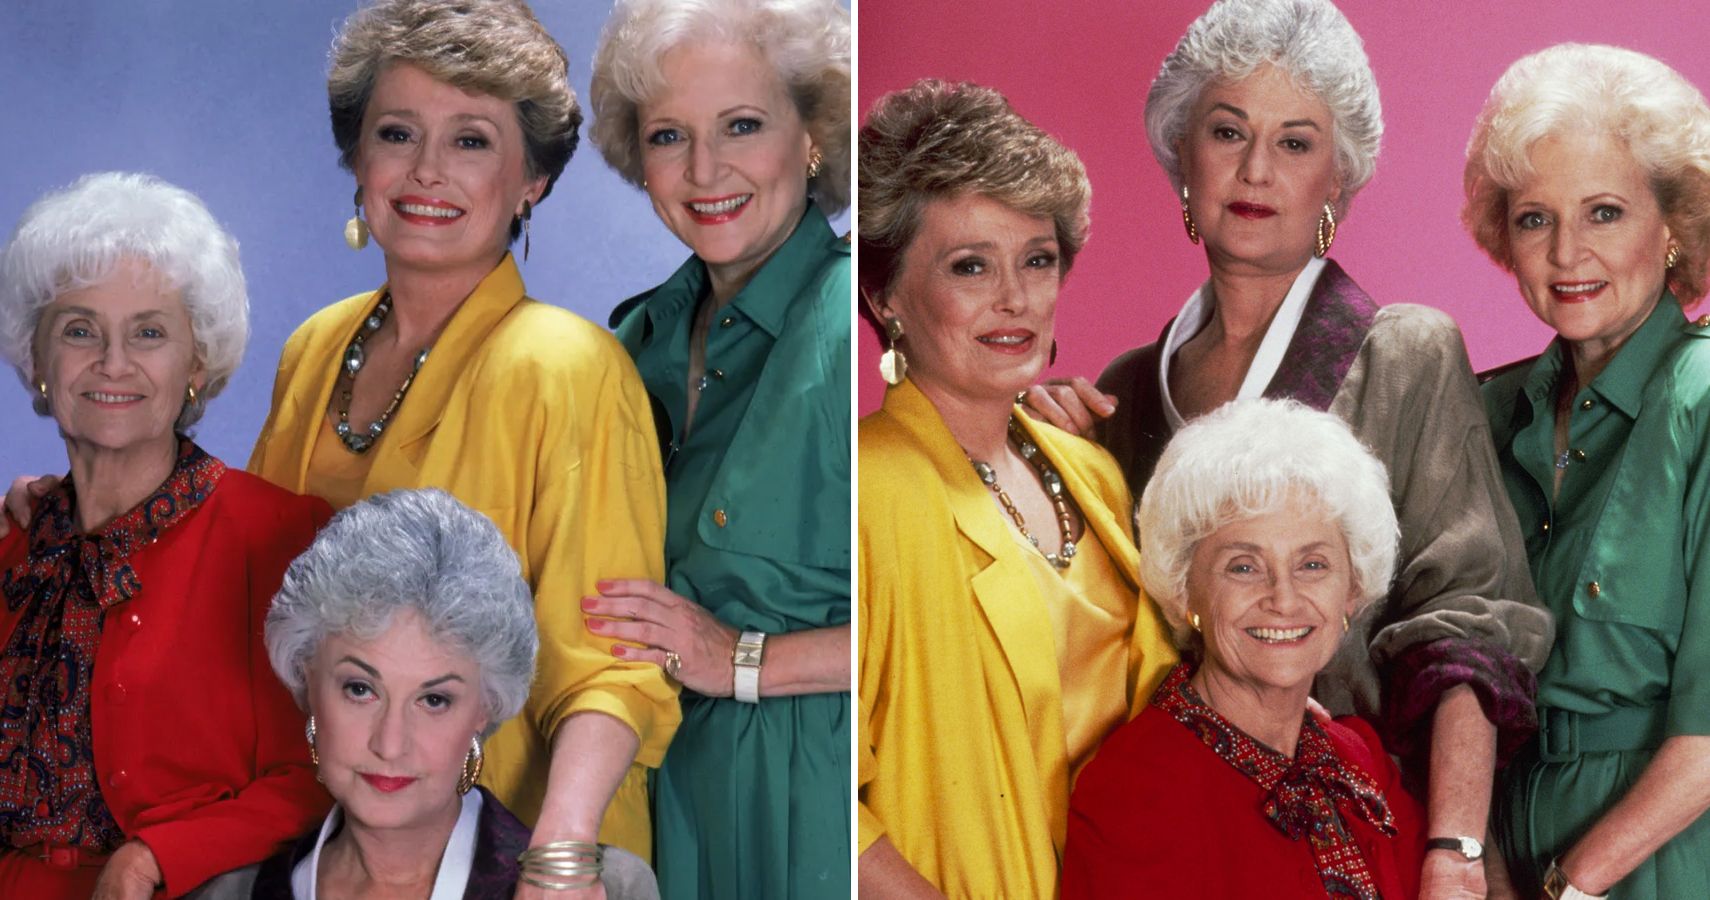 Golden Girls: 10 Worst Episodes Of The Show (According To IMDb)